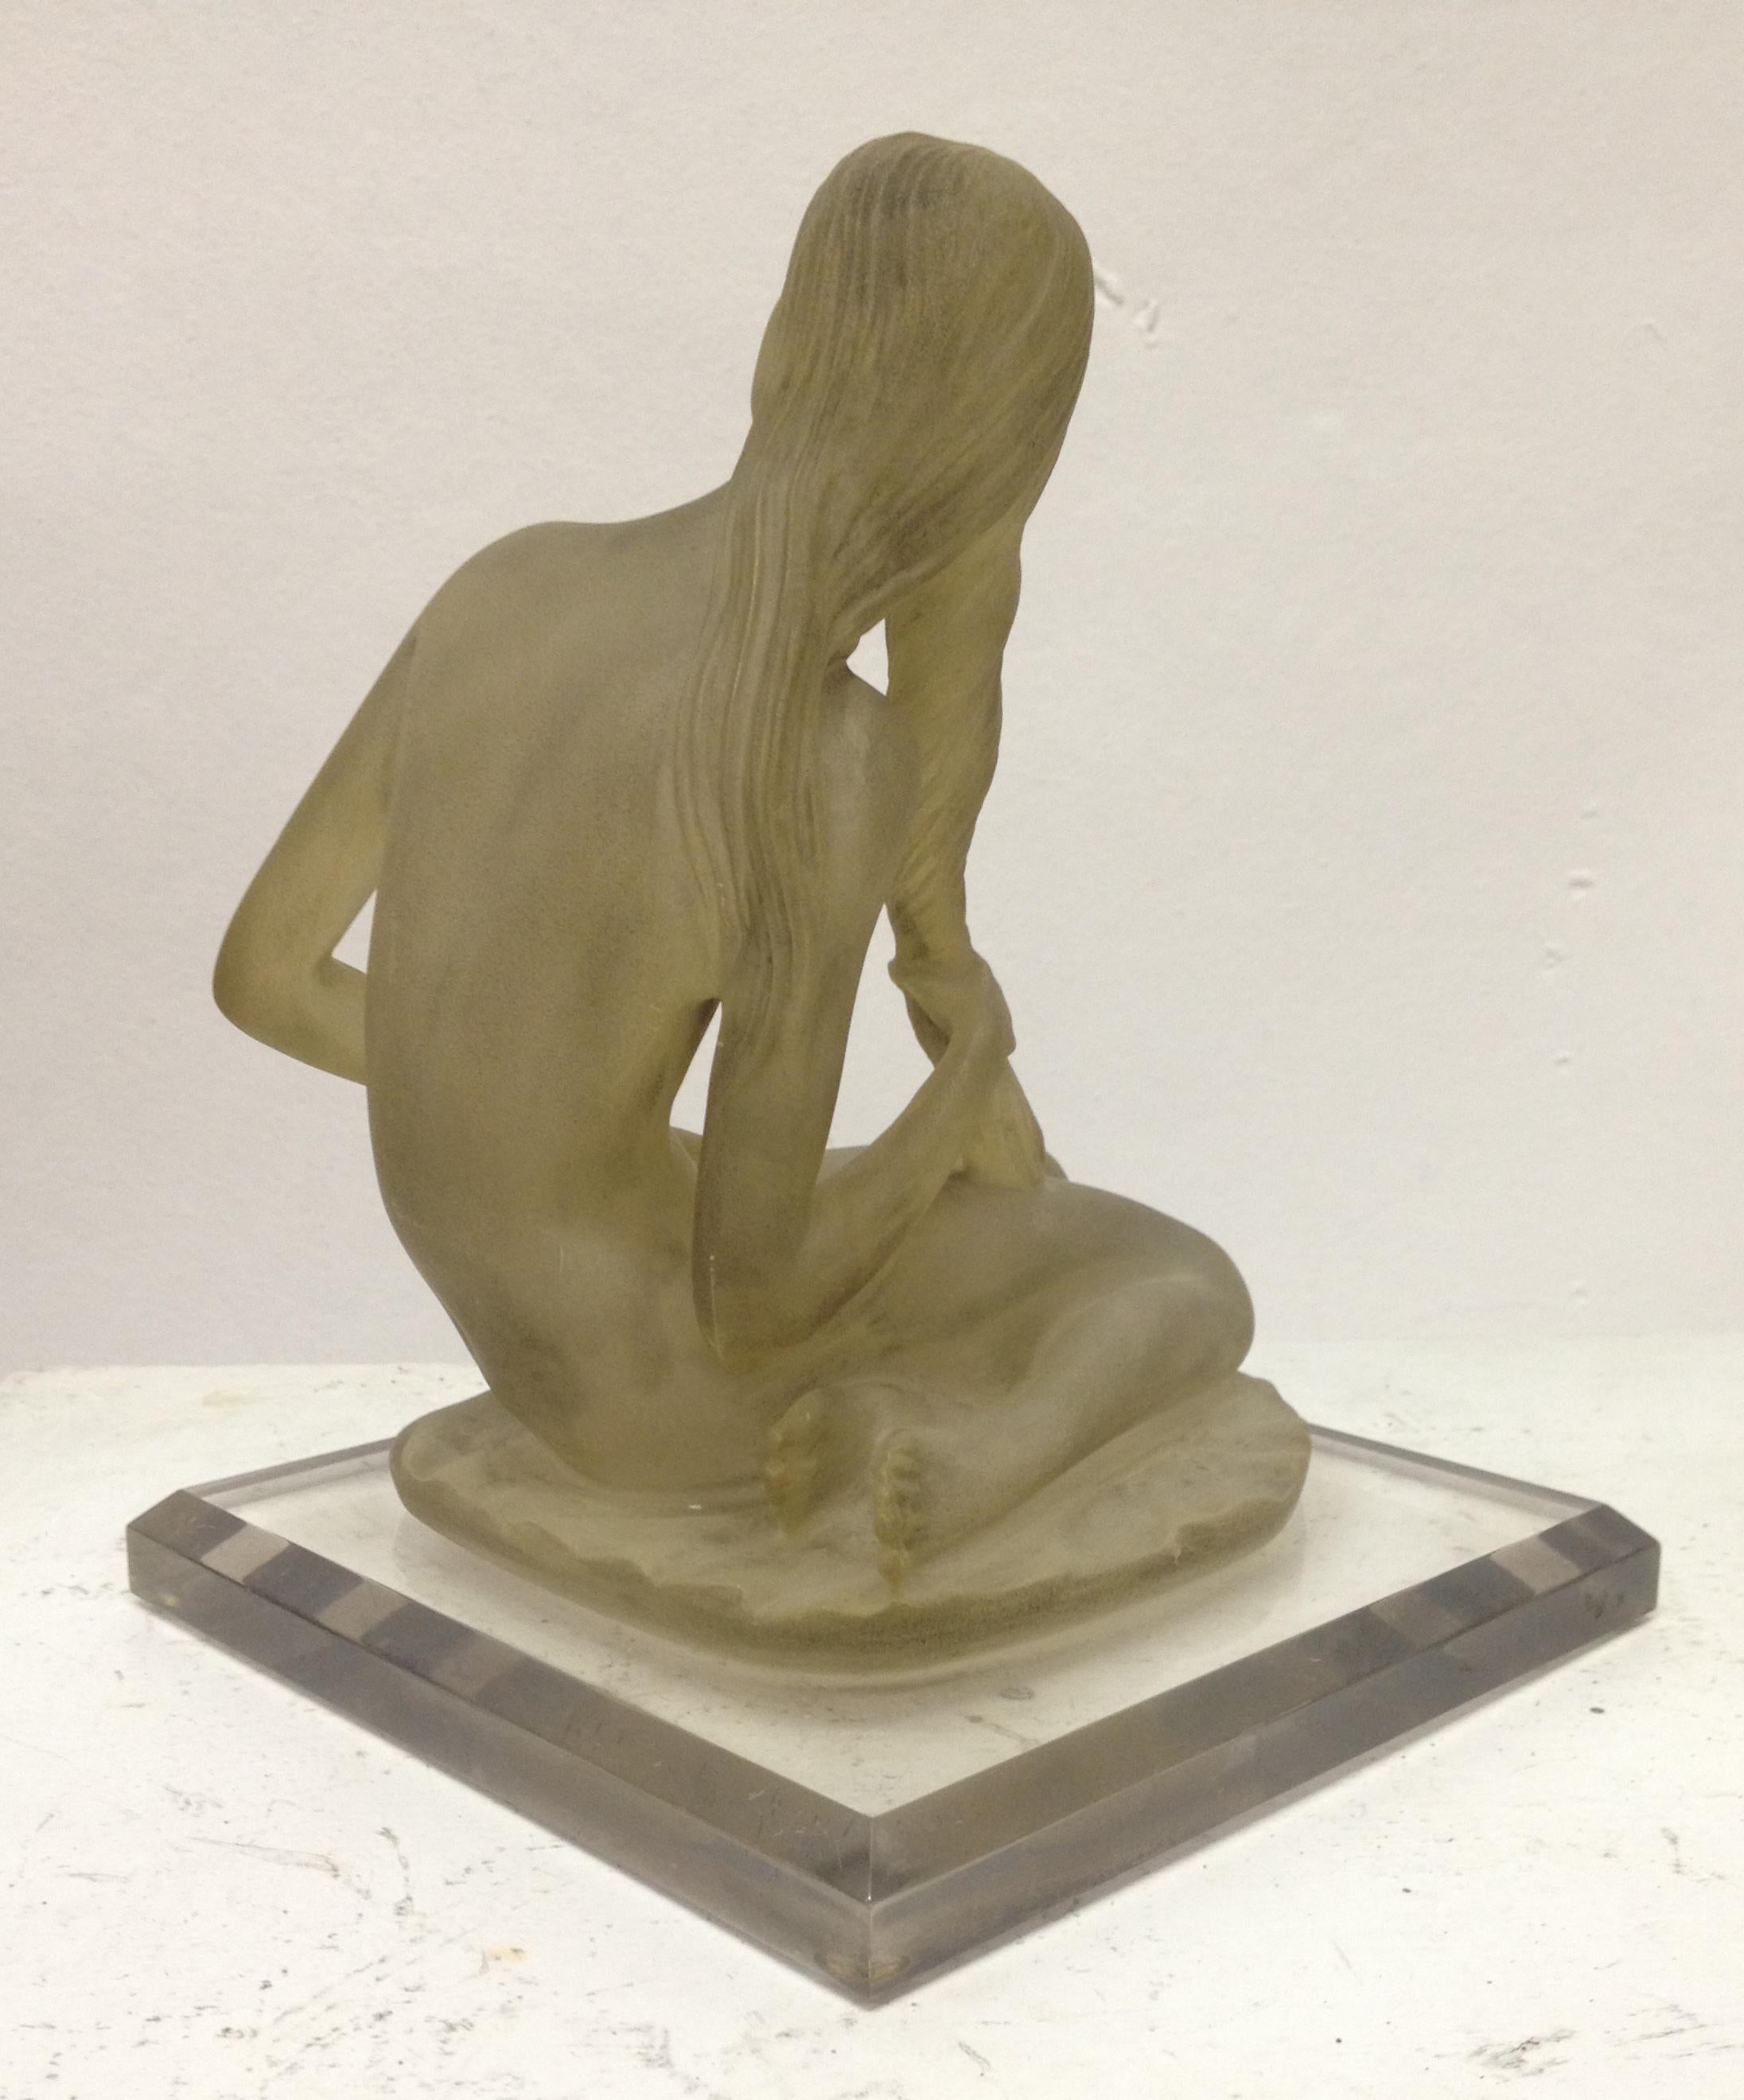 Inspired by classical antiquity, this sculpture of a female nude is skilfully rendered in cast resin. The label underneath reads 